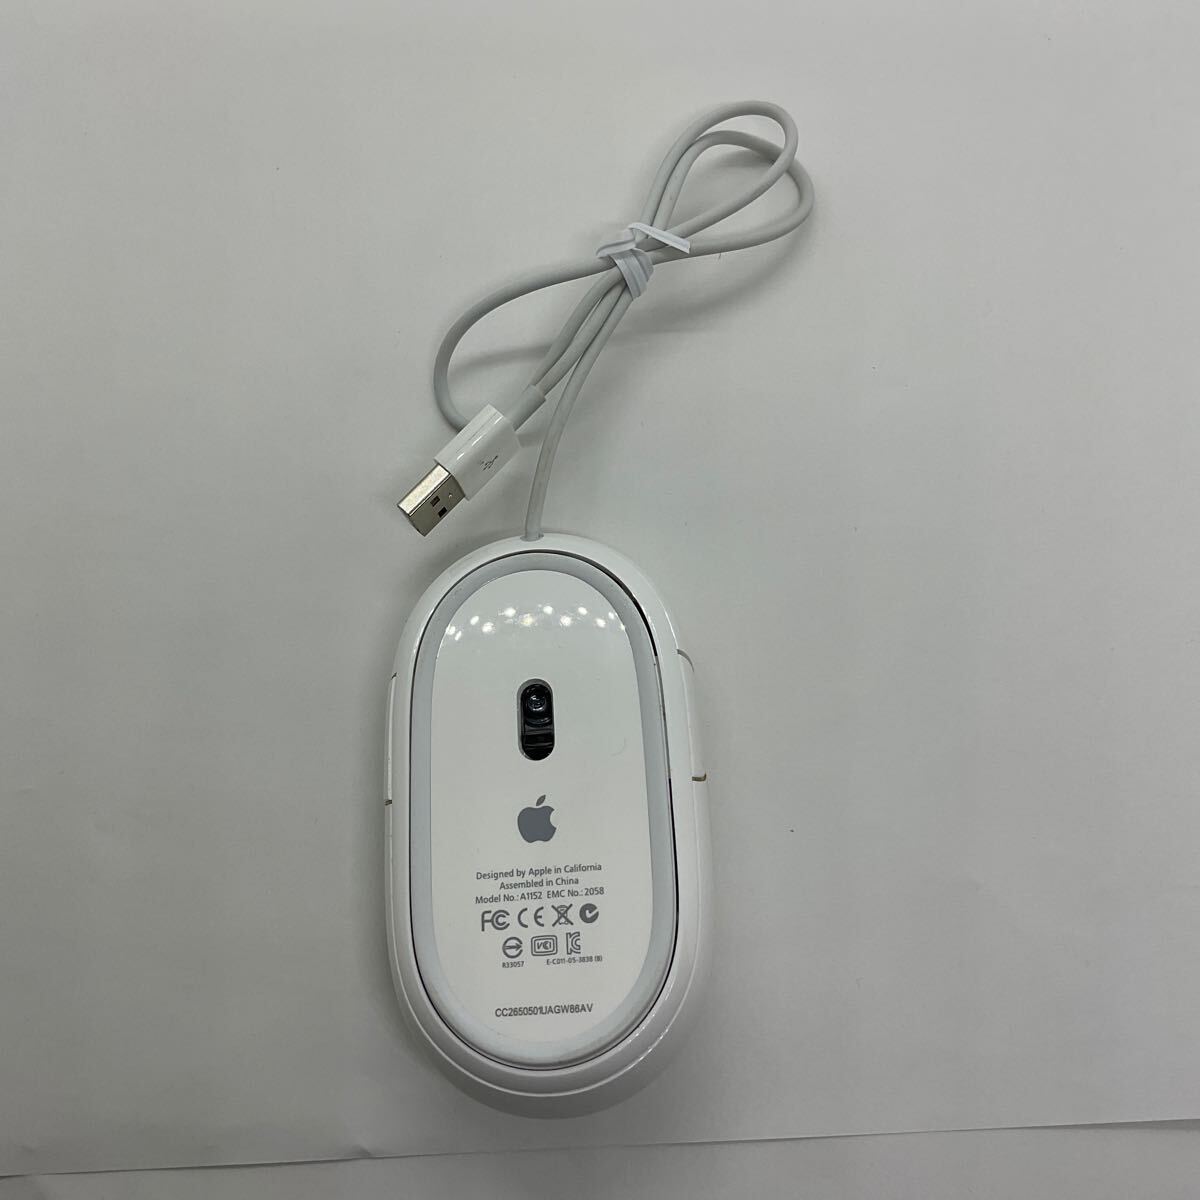 ◎ APPLE MIGHTY MOUSE A1152 有線マウス 5個セット 動作品 純正品の画像2